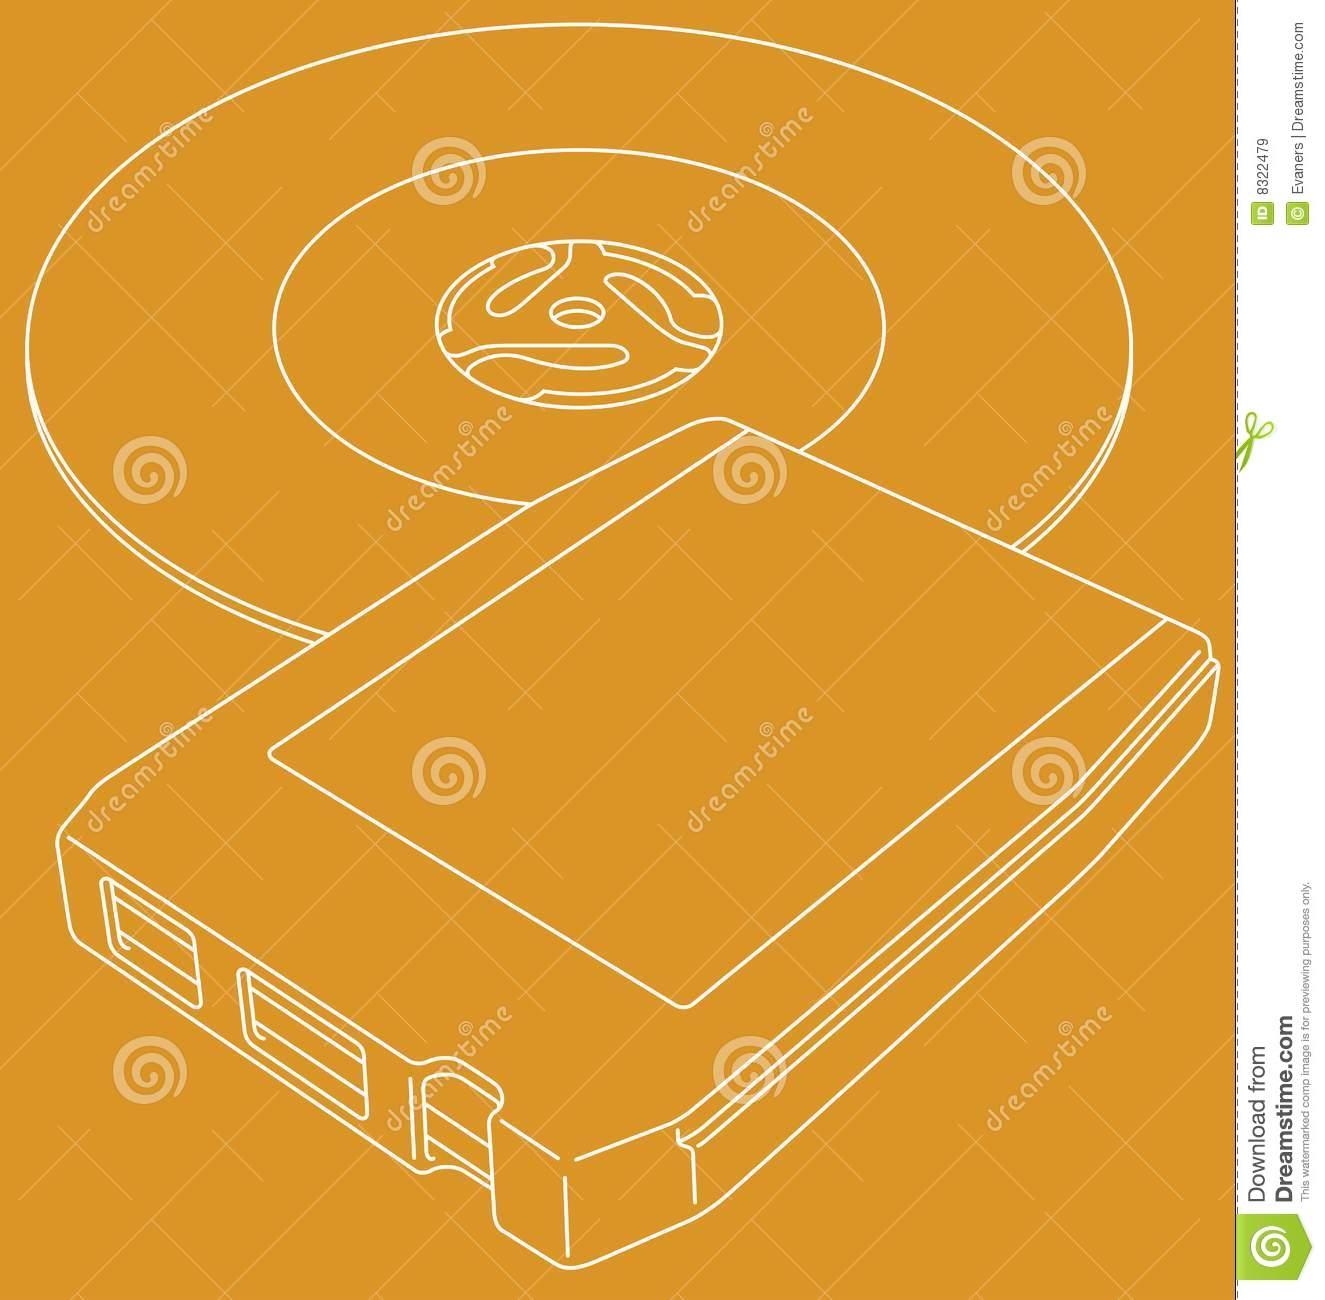 Art Illustration Of A Retro 8 Track Tape And A 45 Rpm Single Record